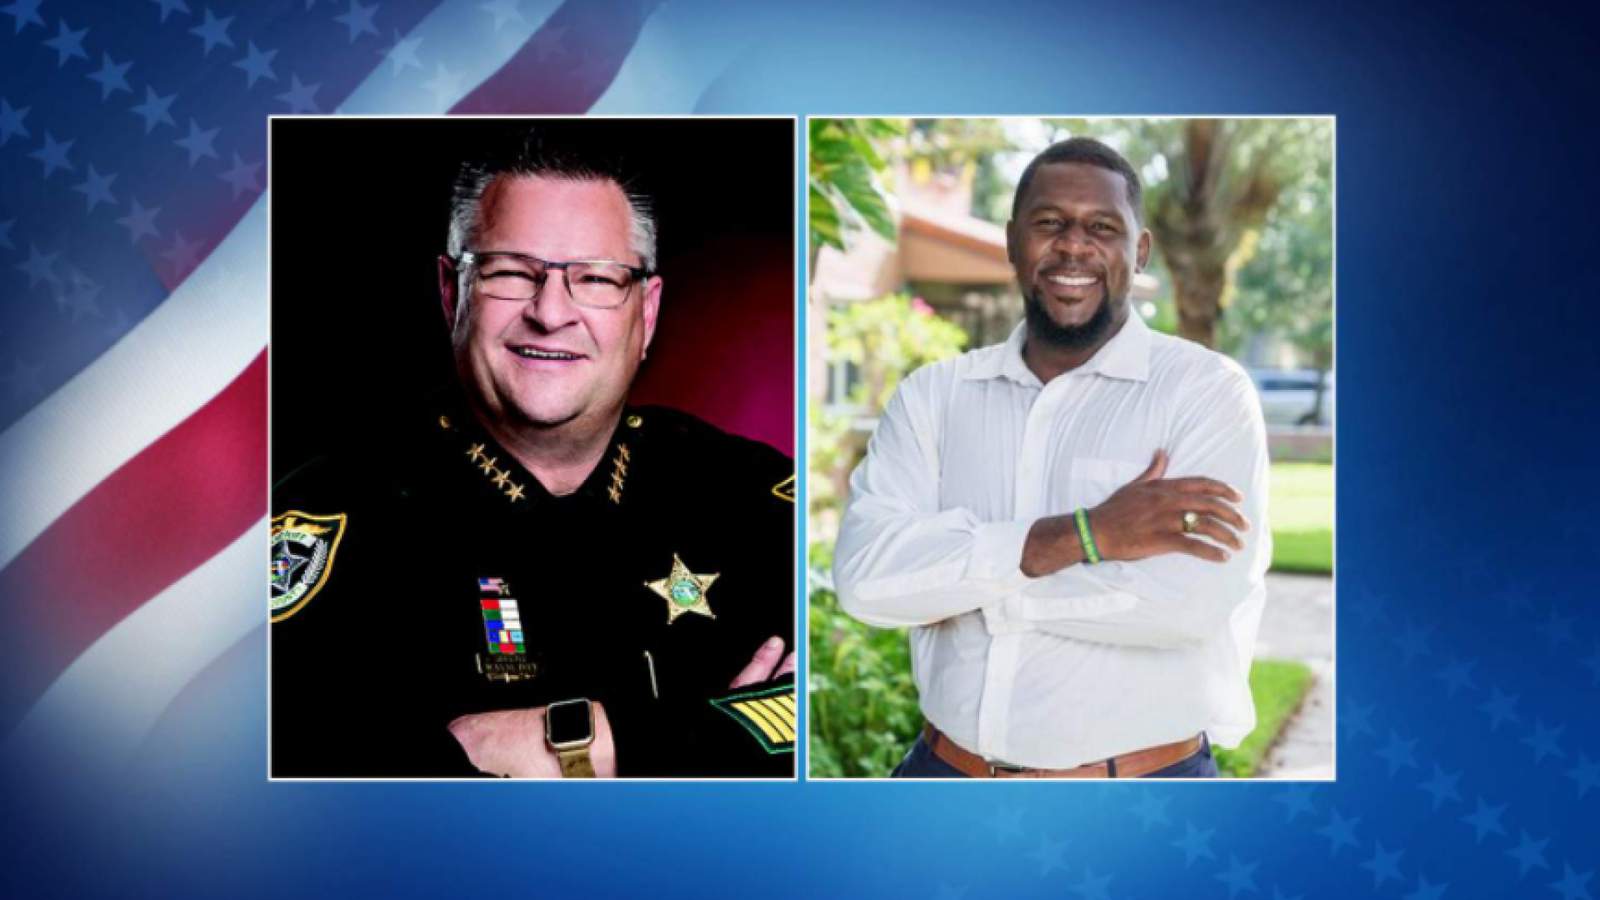 Meet the candidates: Here’s who’s running for Brevard County sheriff